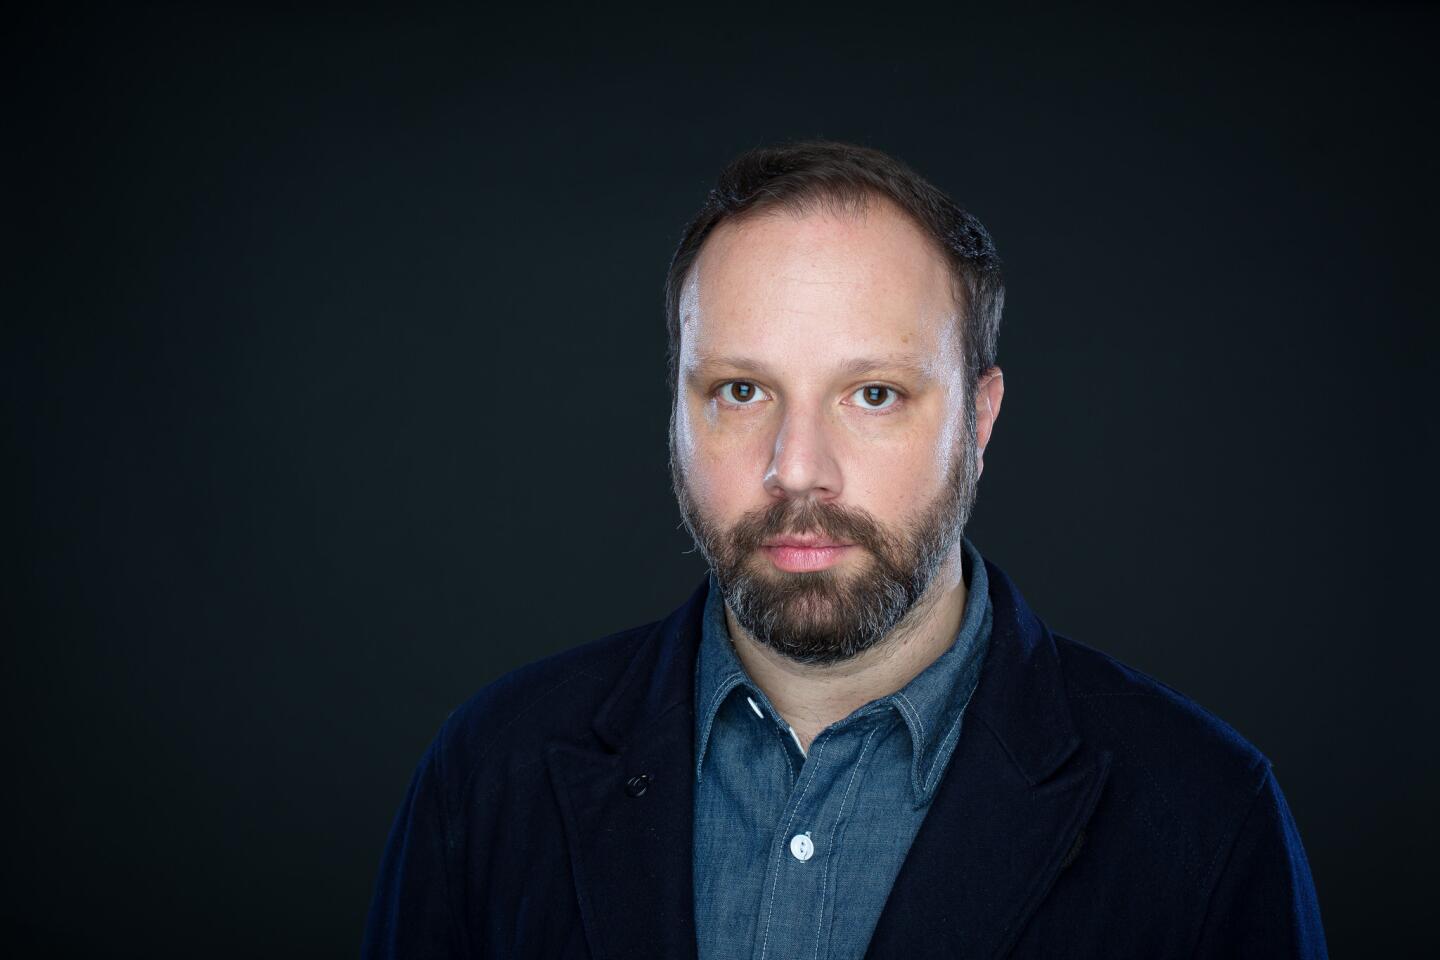 An Oscar nominee in 2017 for his original screenplay “The Lobster,” Lanthimos earns his first directing nomination for the ribald period romp, which also earned him a directing nod from BAFTA.